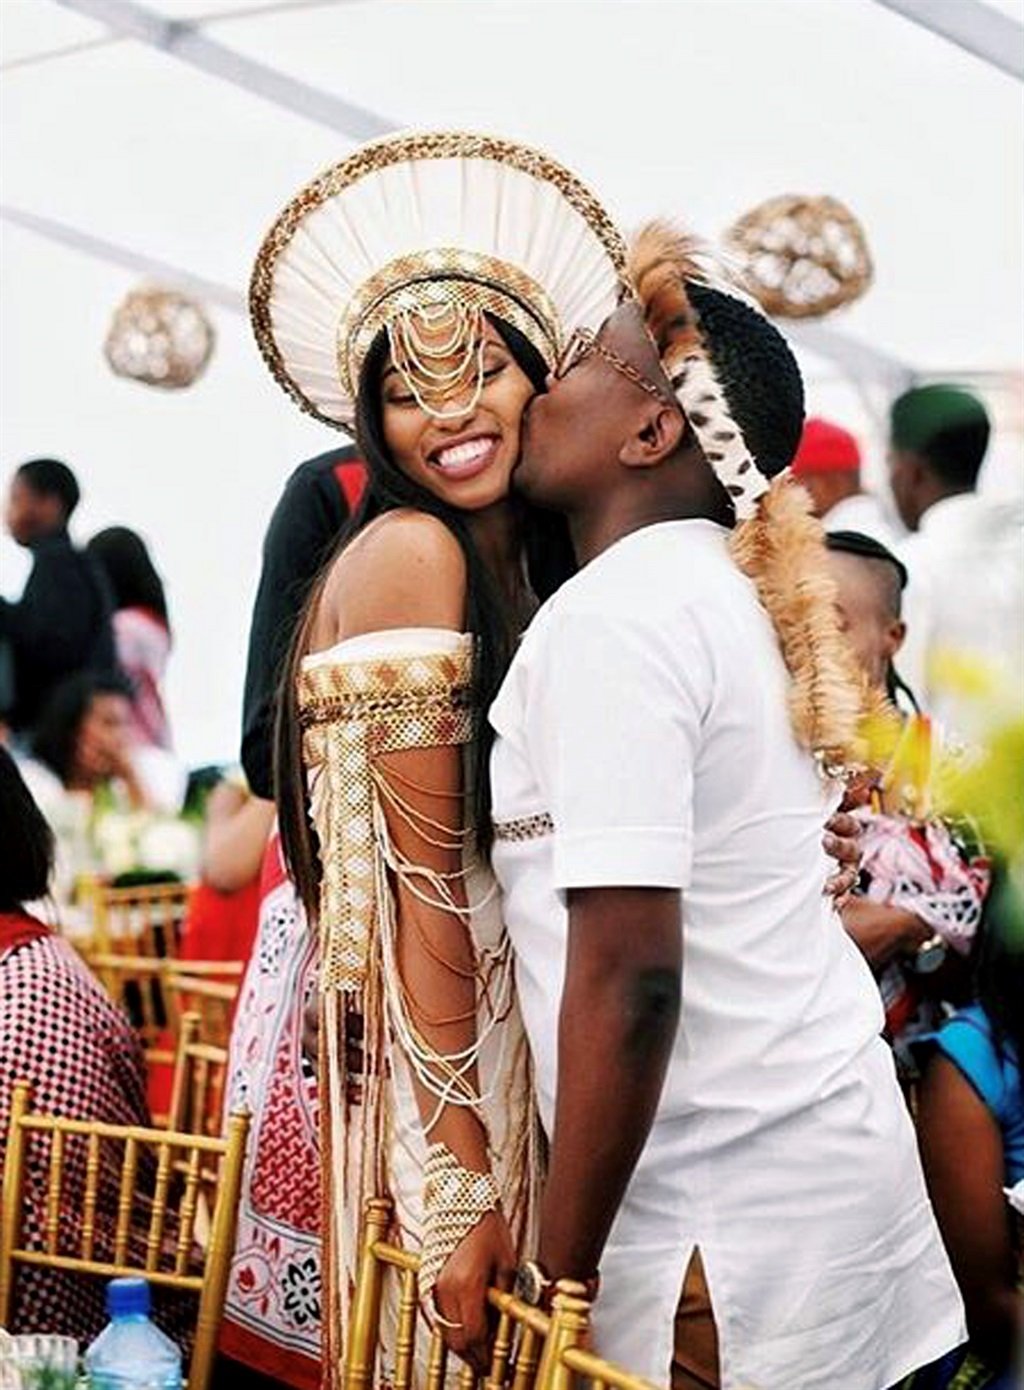 MultI-award winning singer and producer, Khaya Mthethwa, tied the knot in a traditional ceremony in Piet Retief to Miss South Africa 2016, Ntando Kunene. The ceremony was attended by some of his close friends, Ntando has officially changed her surname on Instagram to Mthethwa. Photo from Instagram